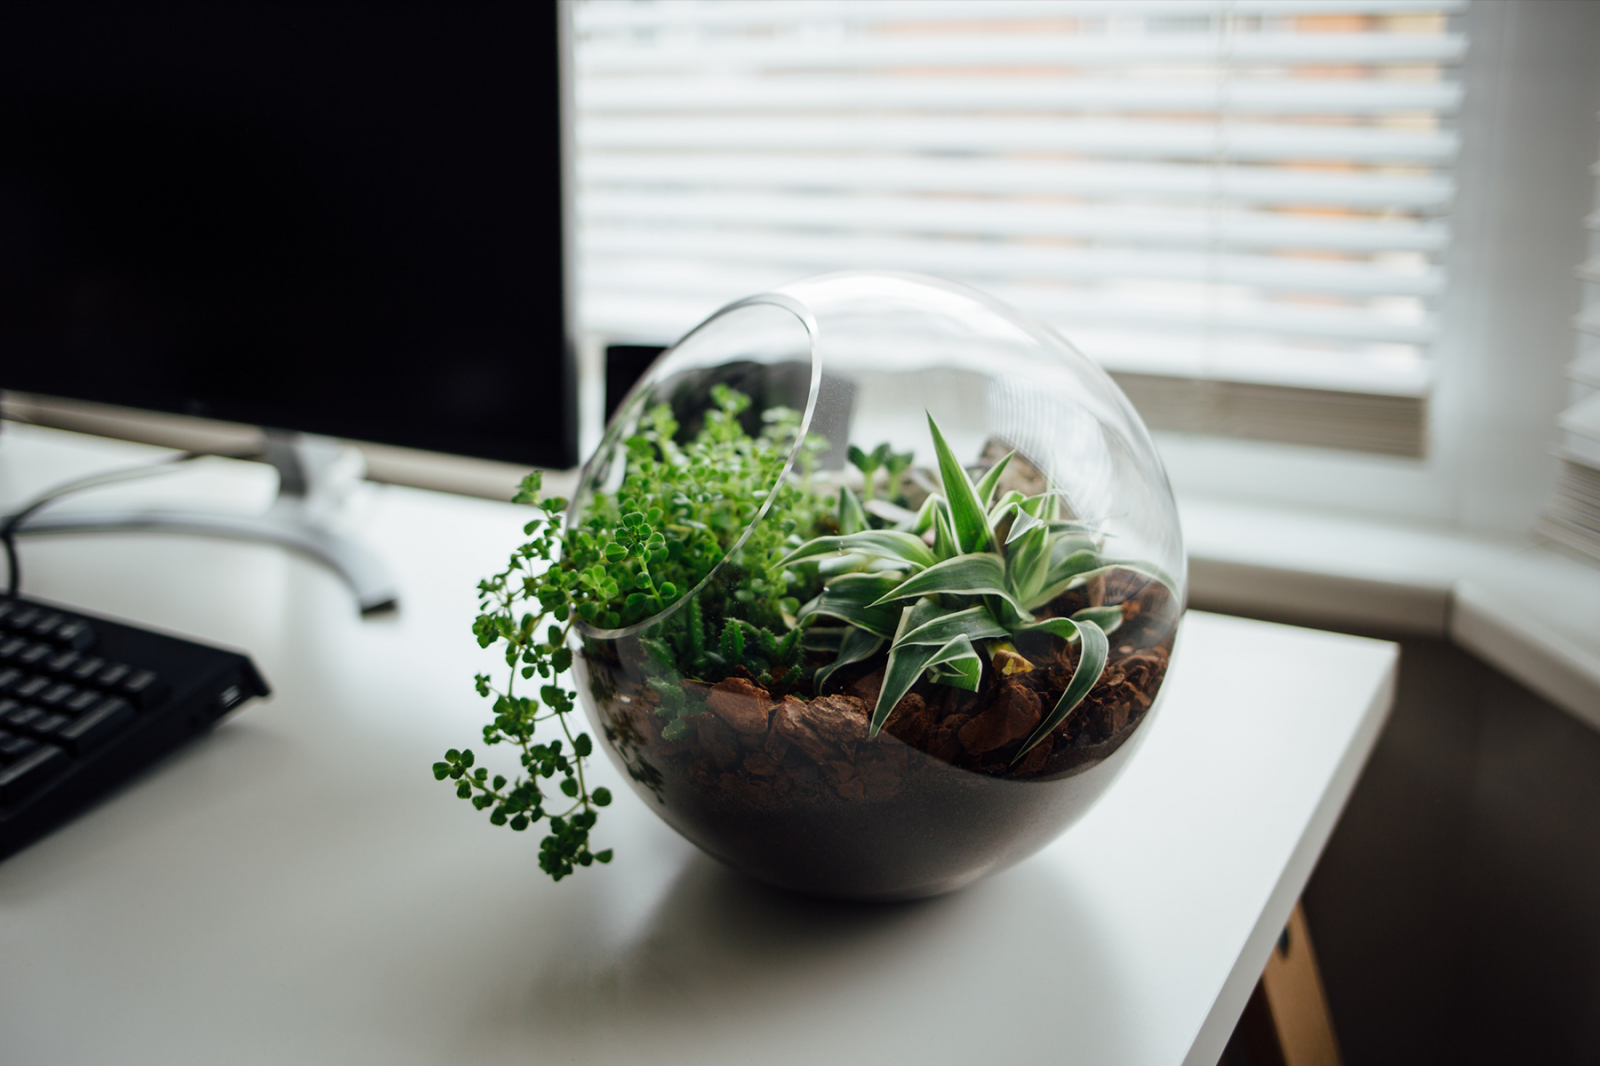 What Are The Best Plants For A Home Office? Top 10 Recommendations